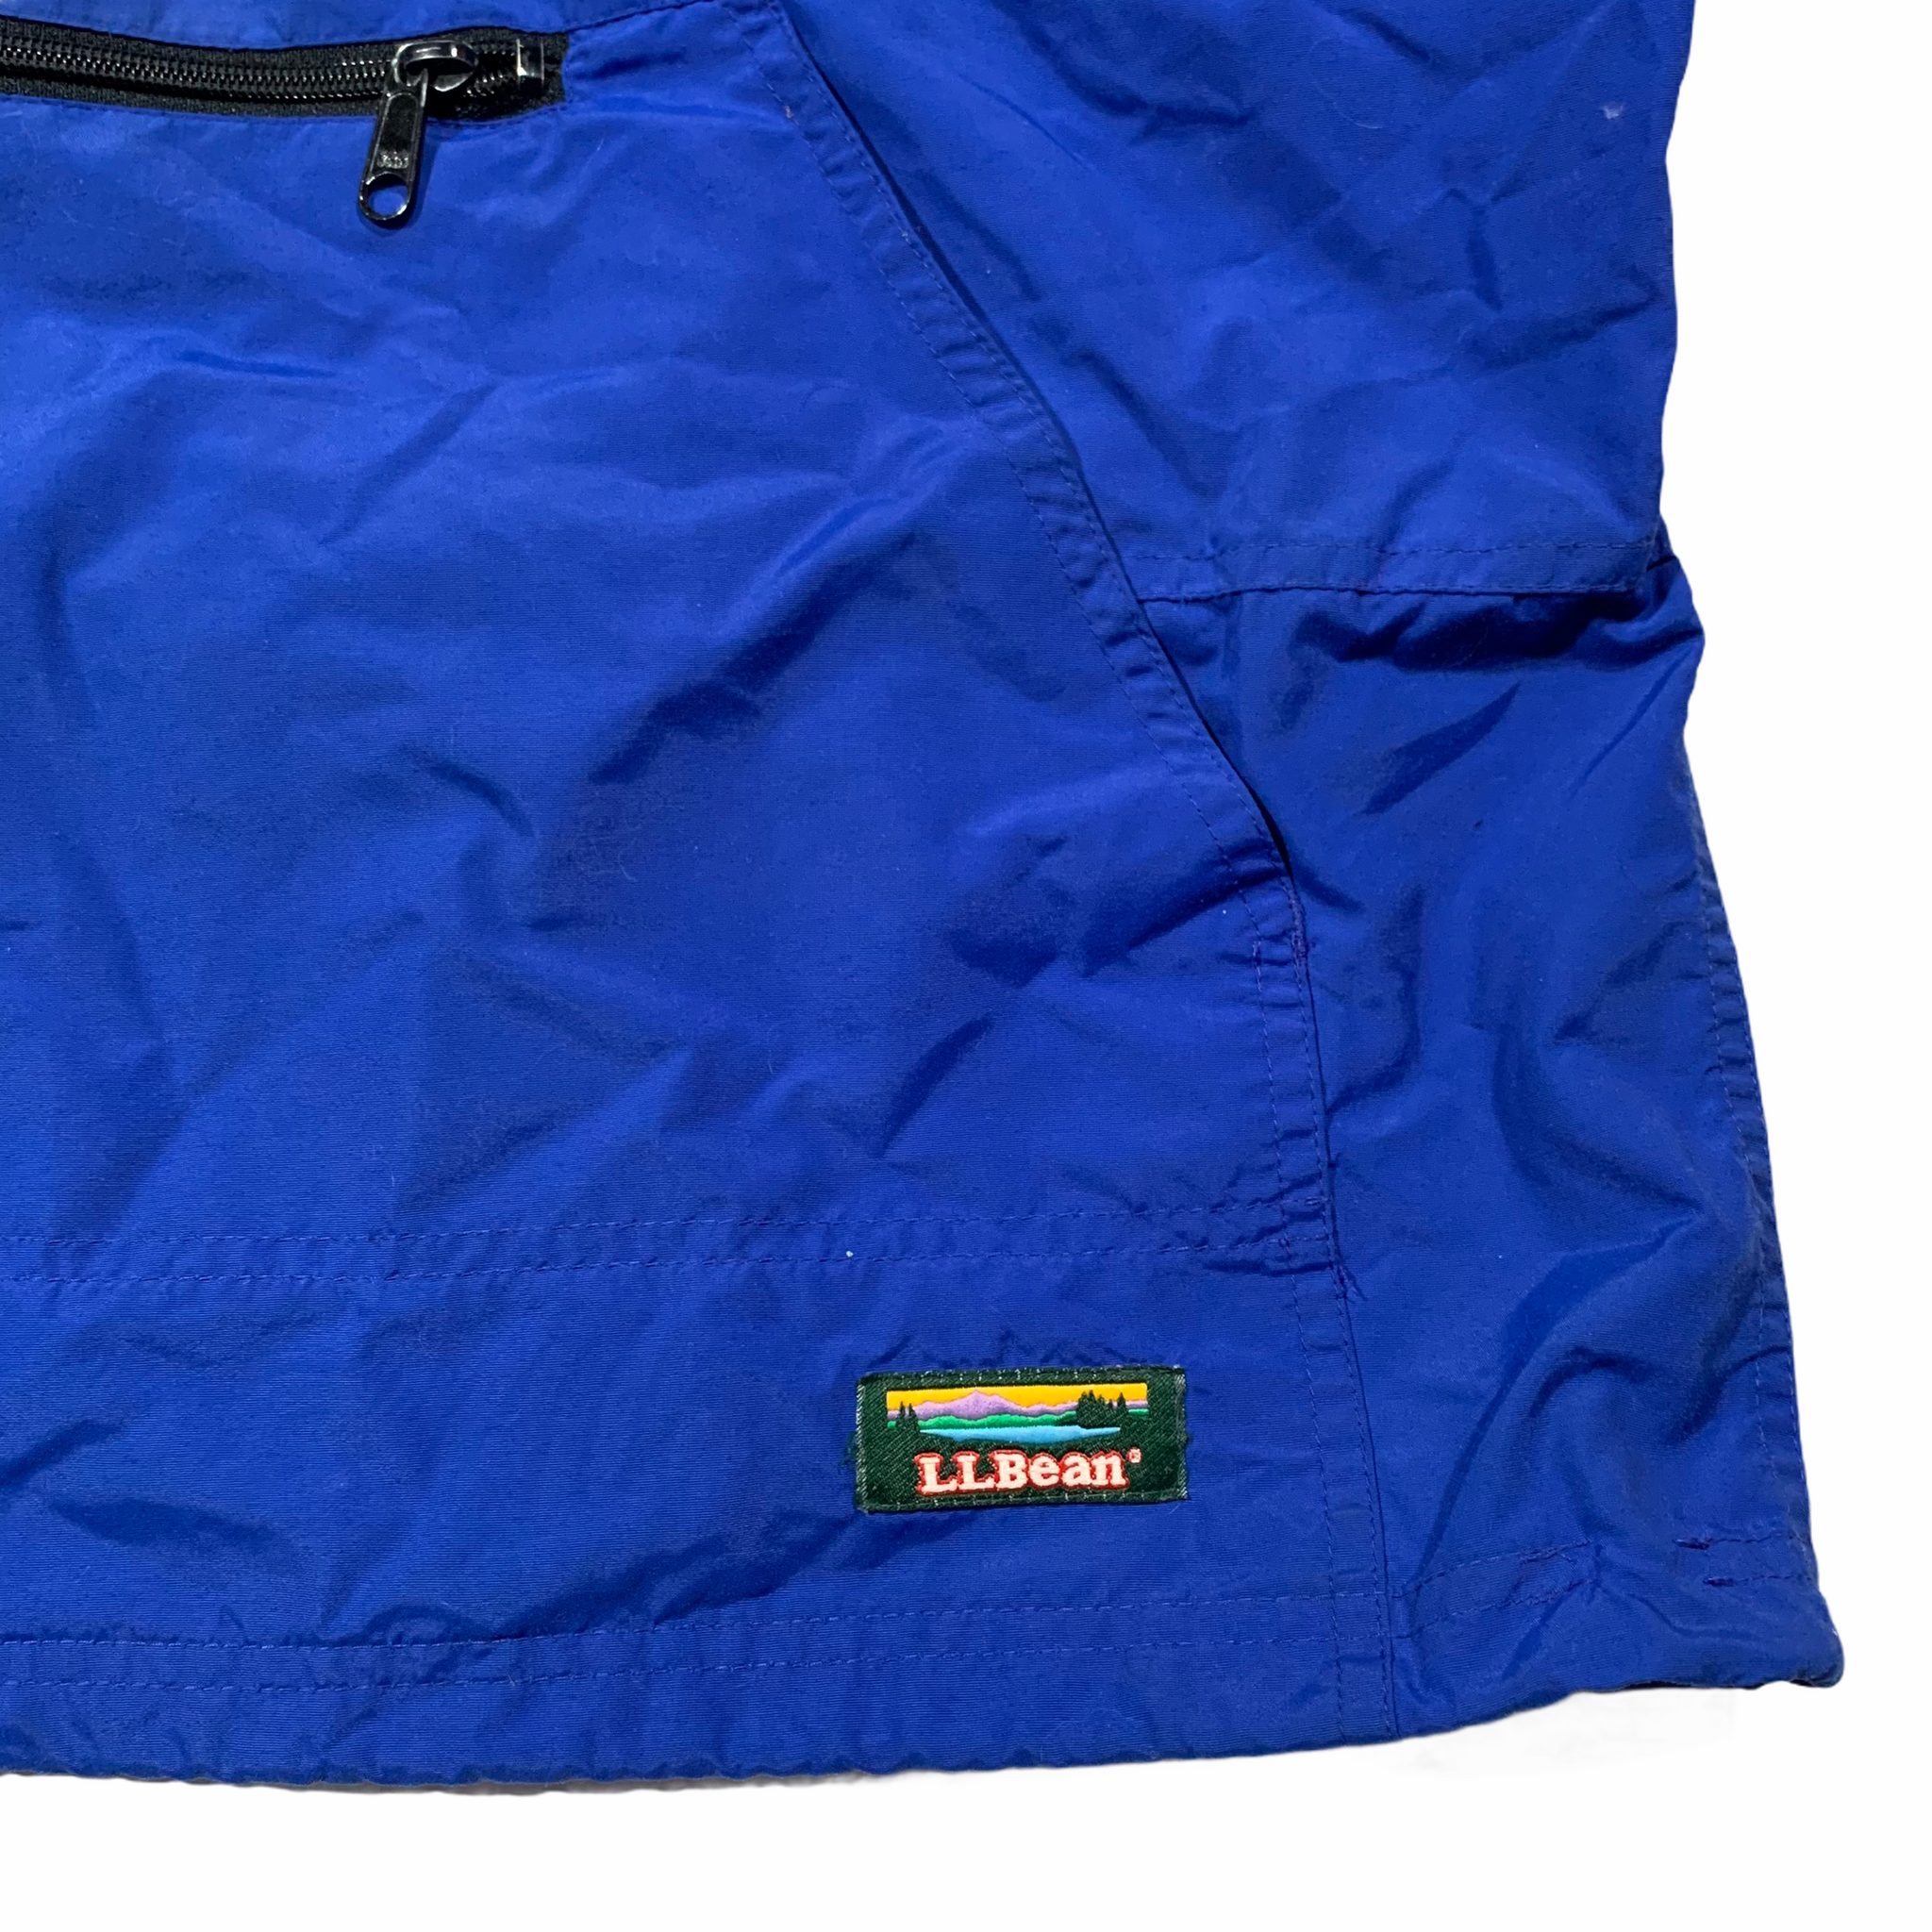 80’s/90’s LL Bean anorak jacket. Made in USA. L.